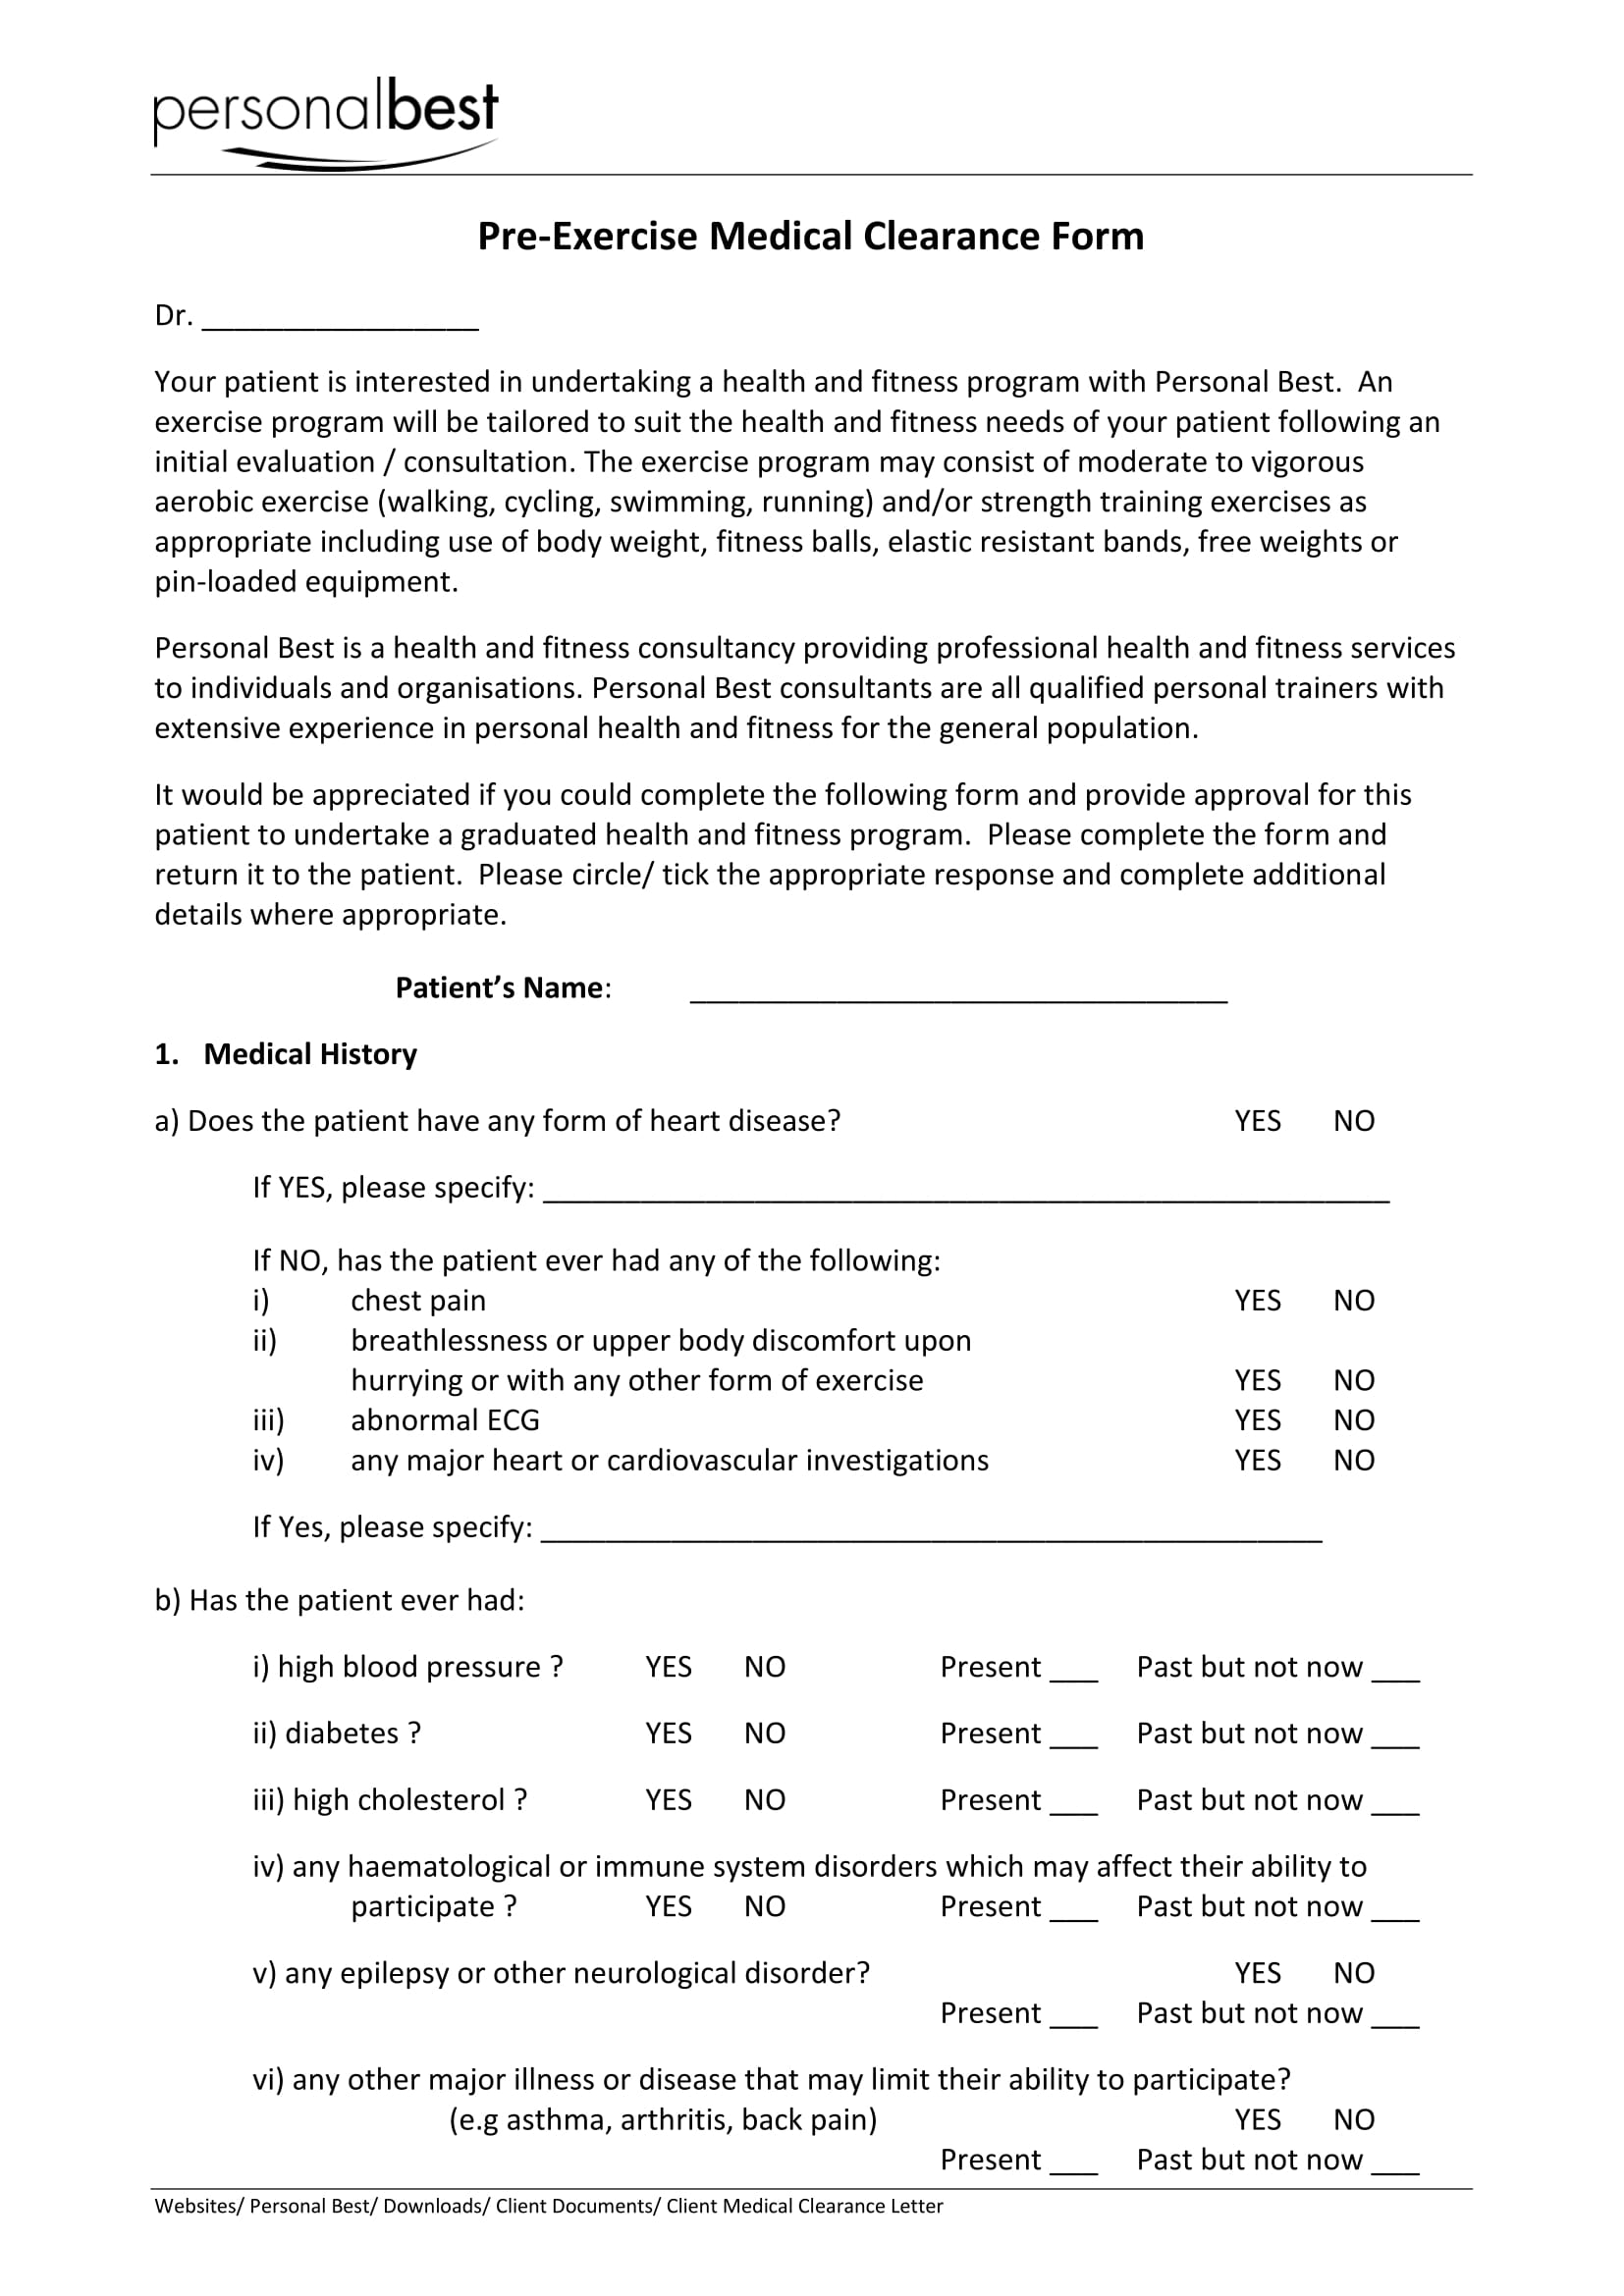 pre exercise medical clearance form 1